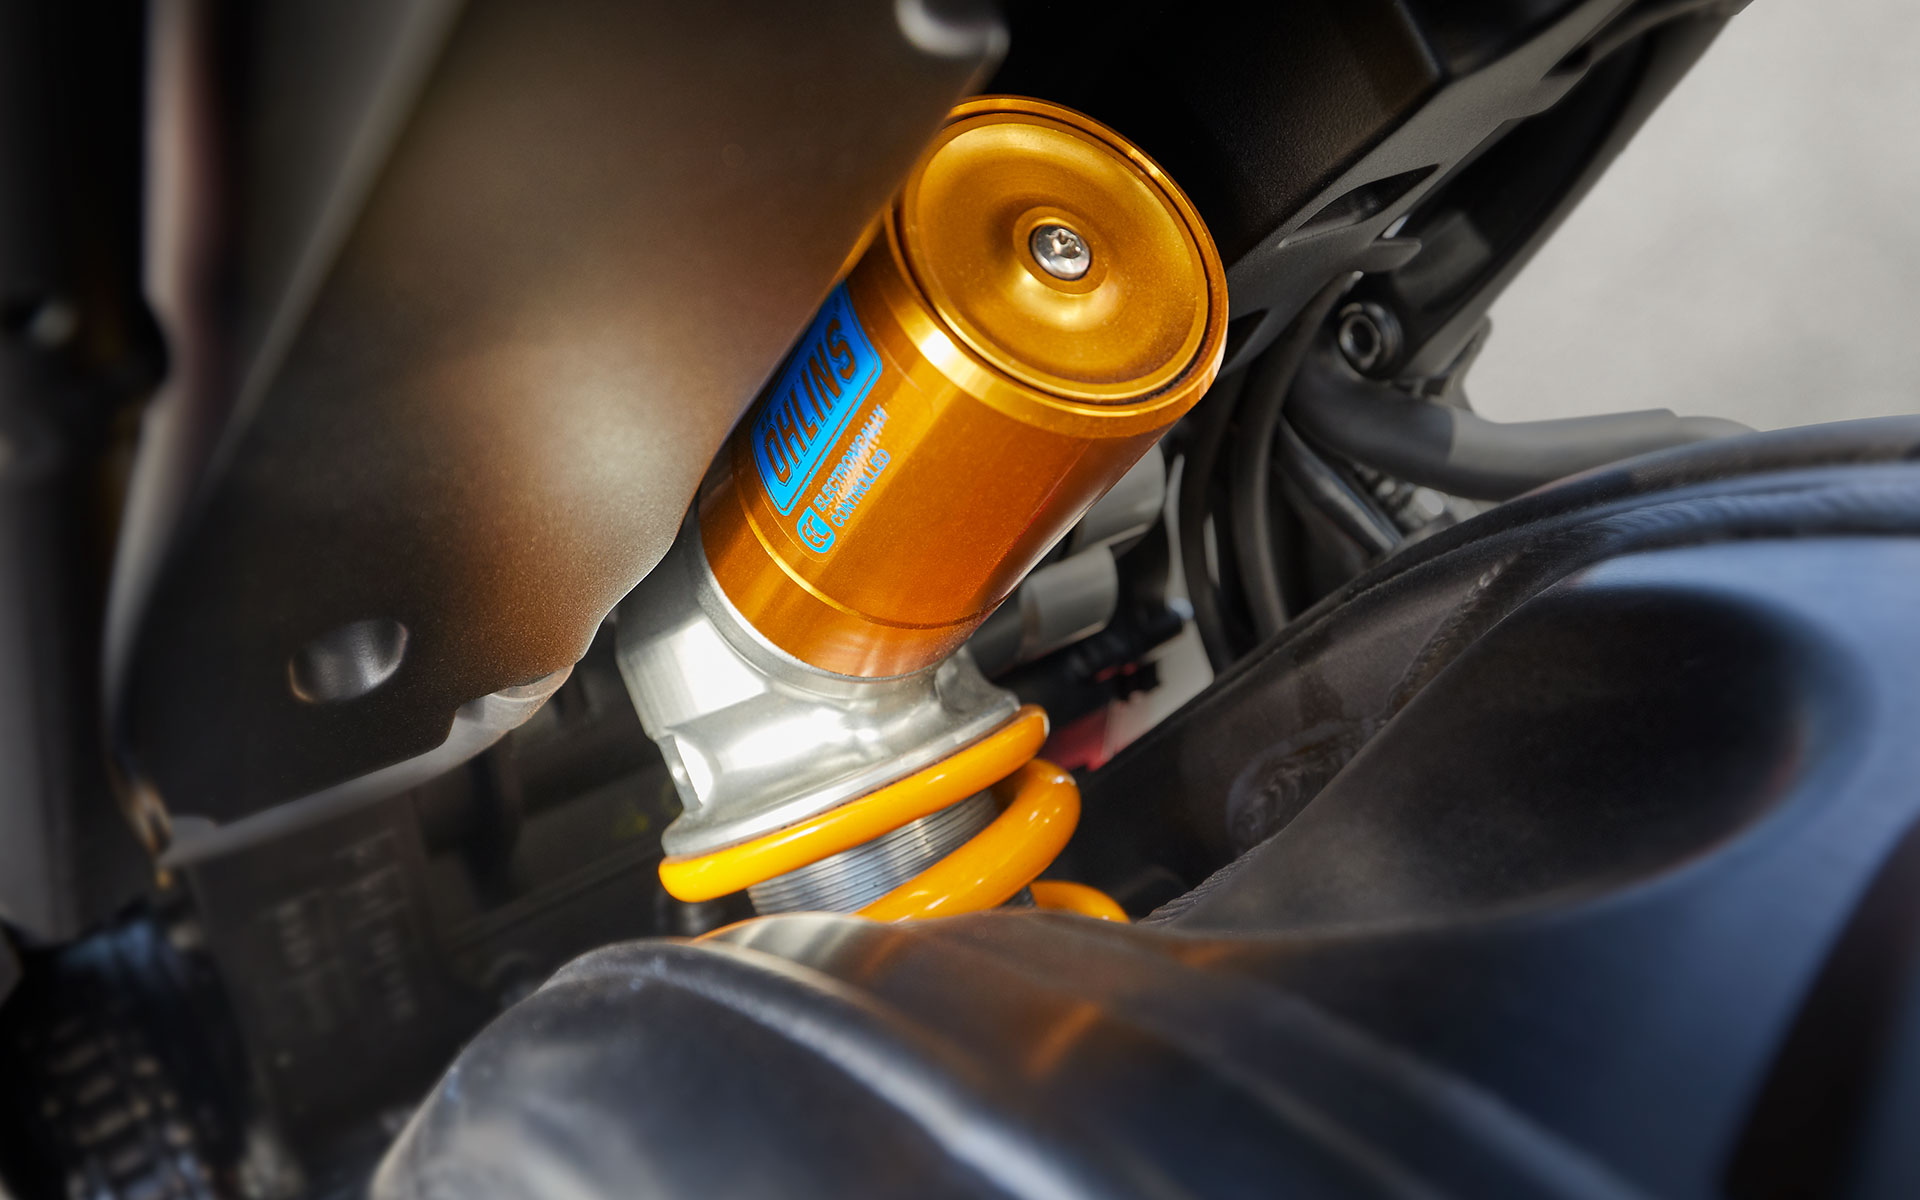 Close-up of Öhlins Smart Electronically Controlled suspension. Smart-EC.